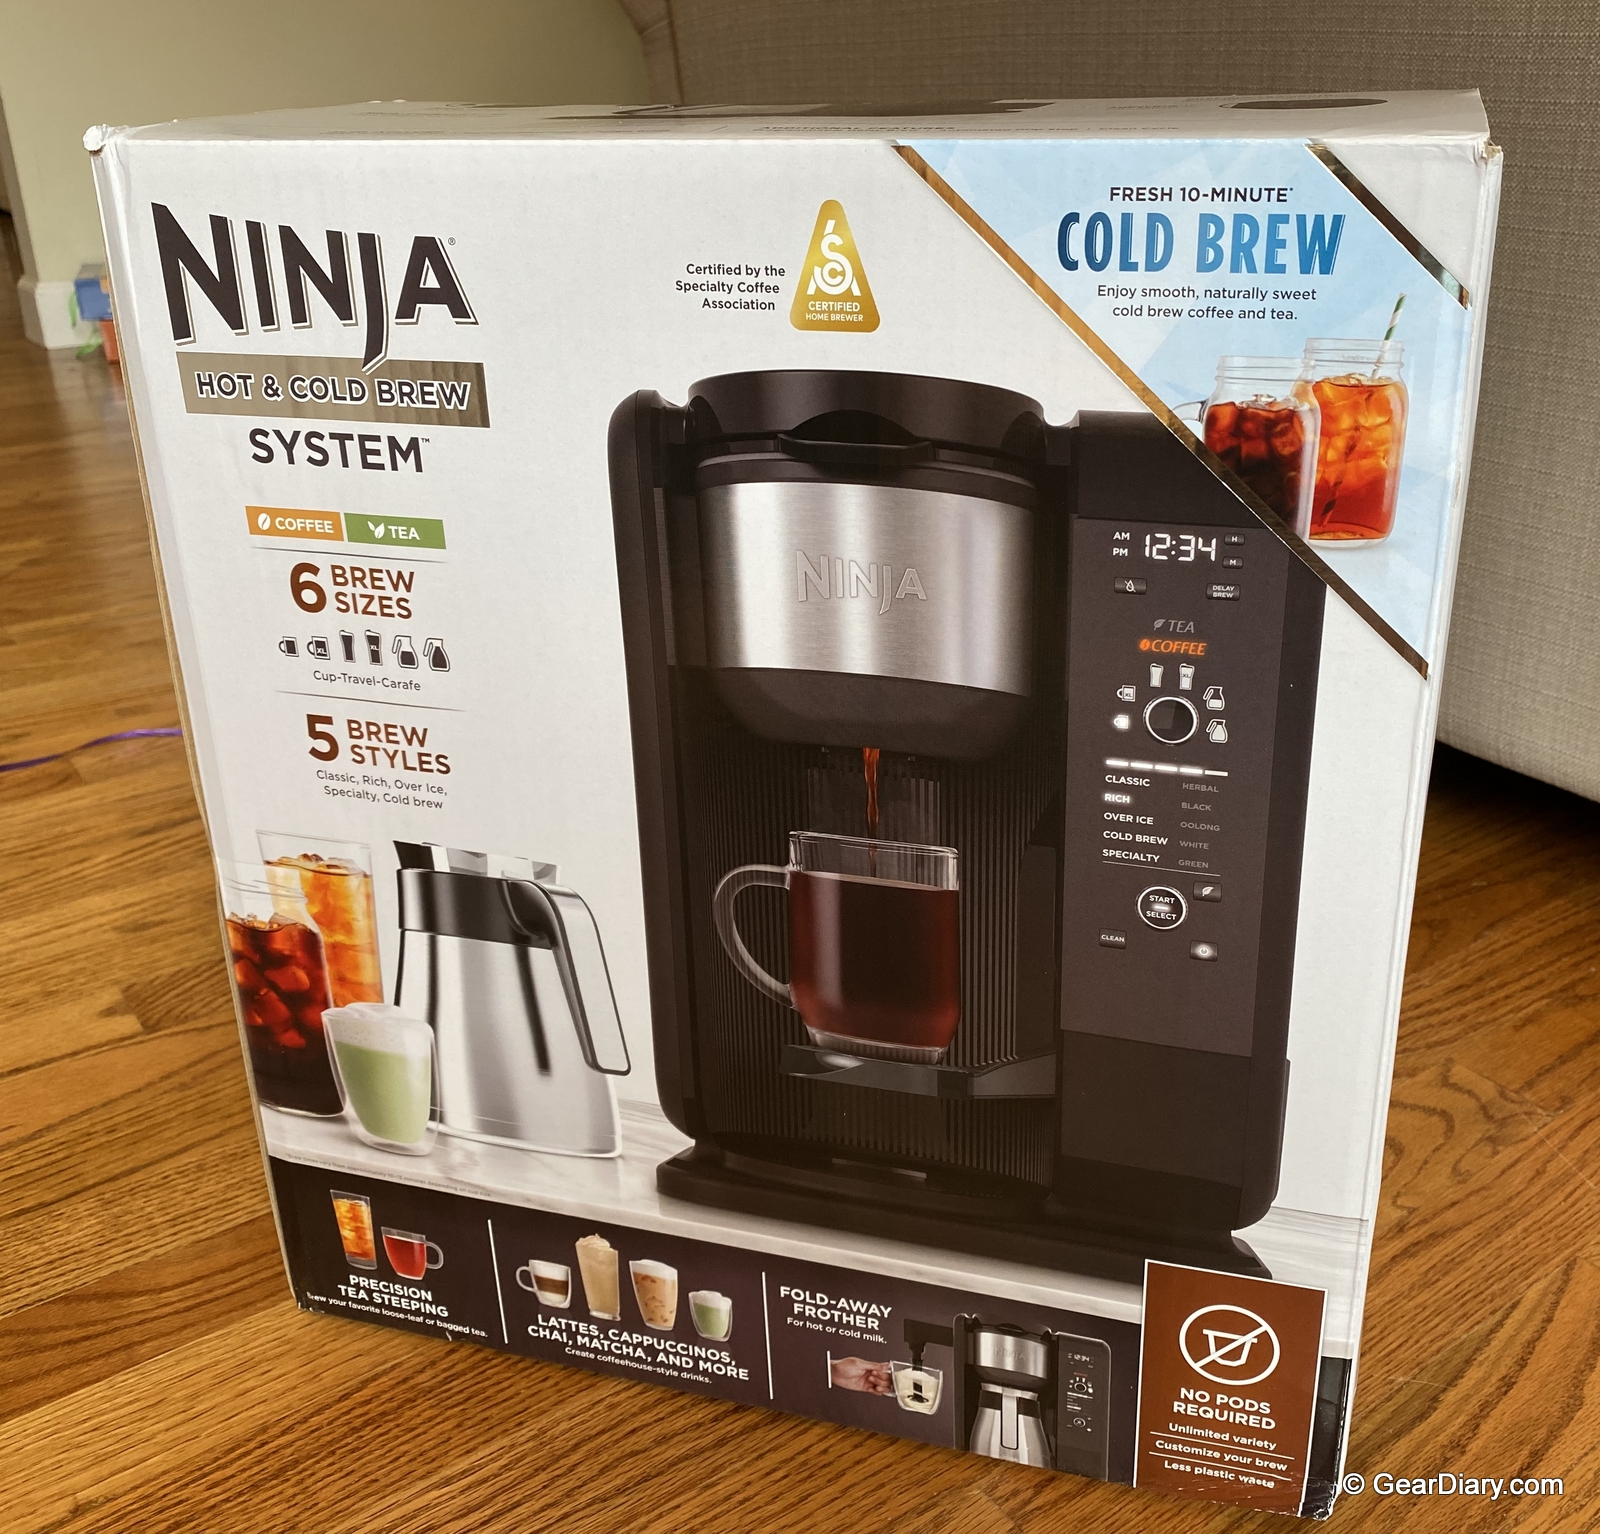 Ninja's Hot & Cold Brew System Offers Choice and Versatility While